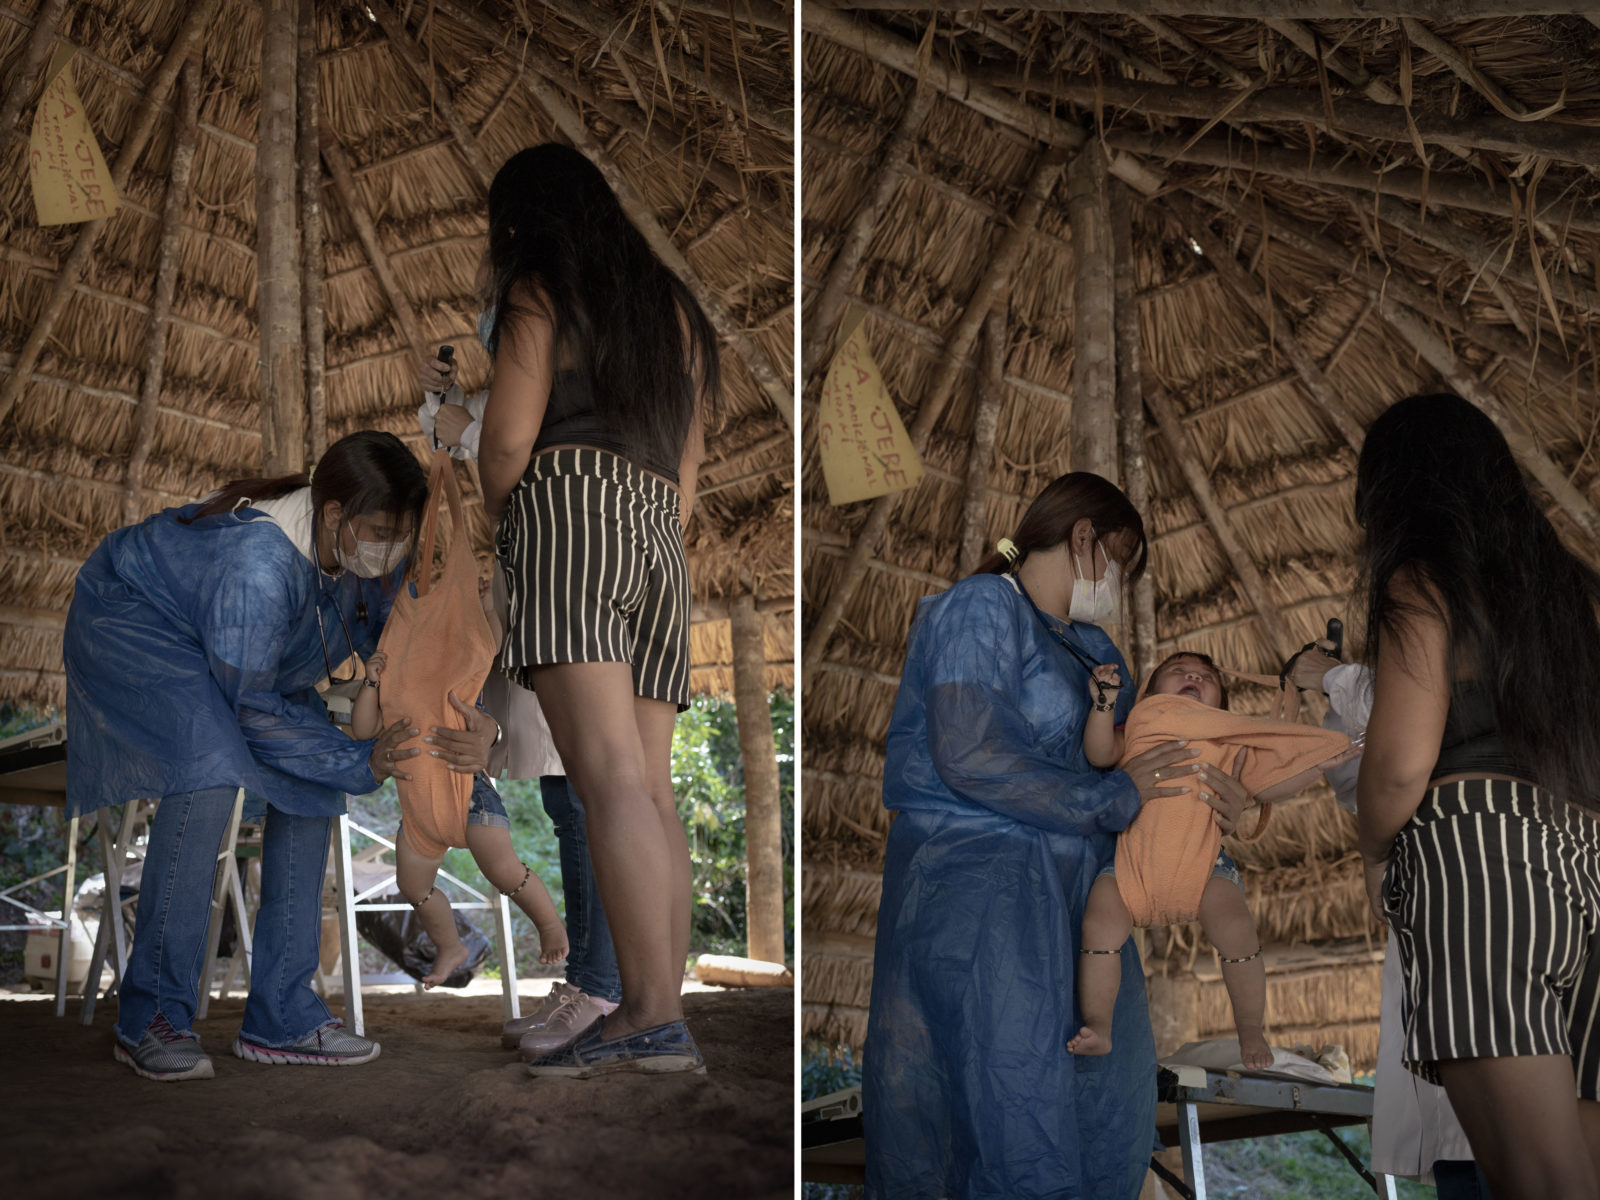 Two side-by-side photos of a doctor weighing a child inside a thatched roof dwelling